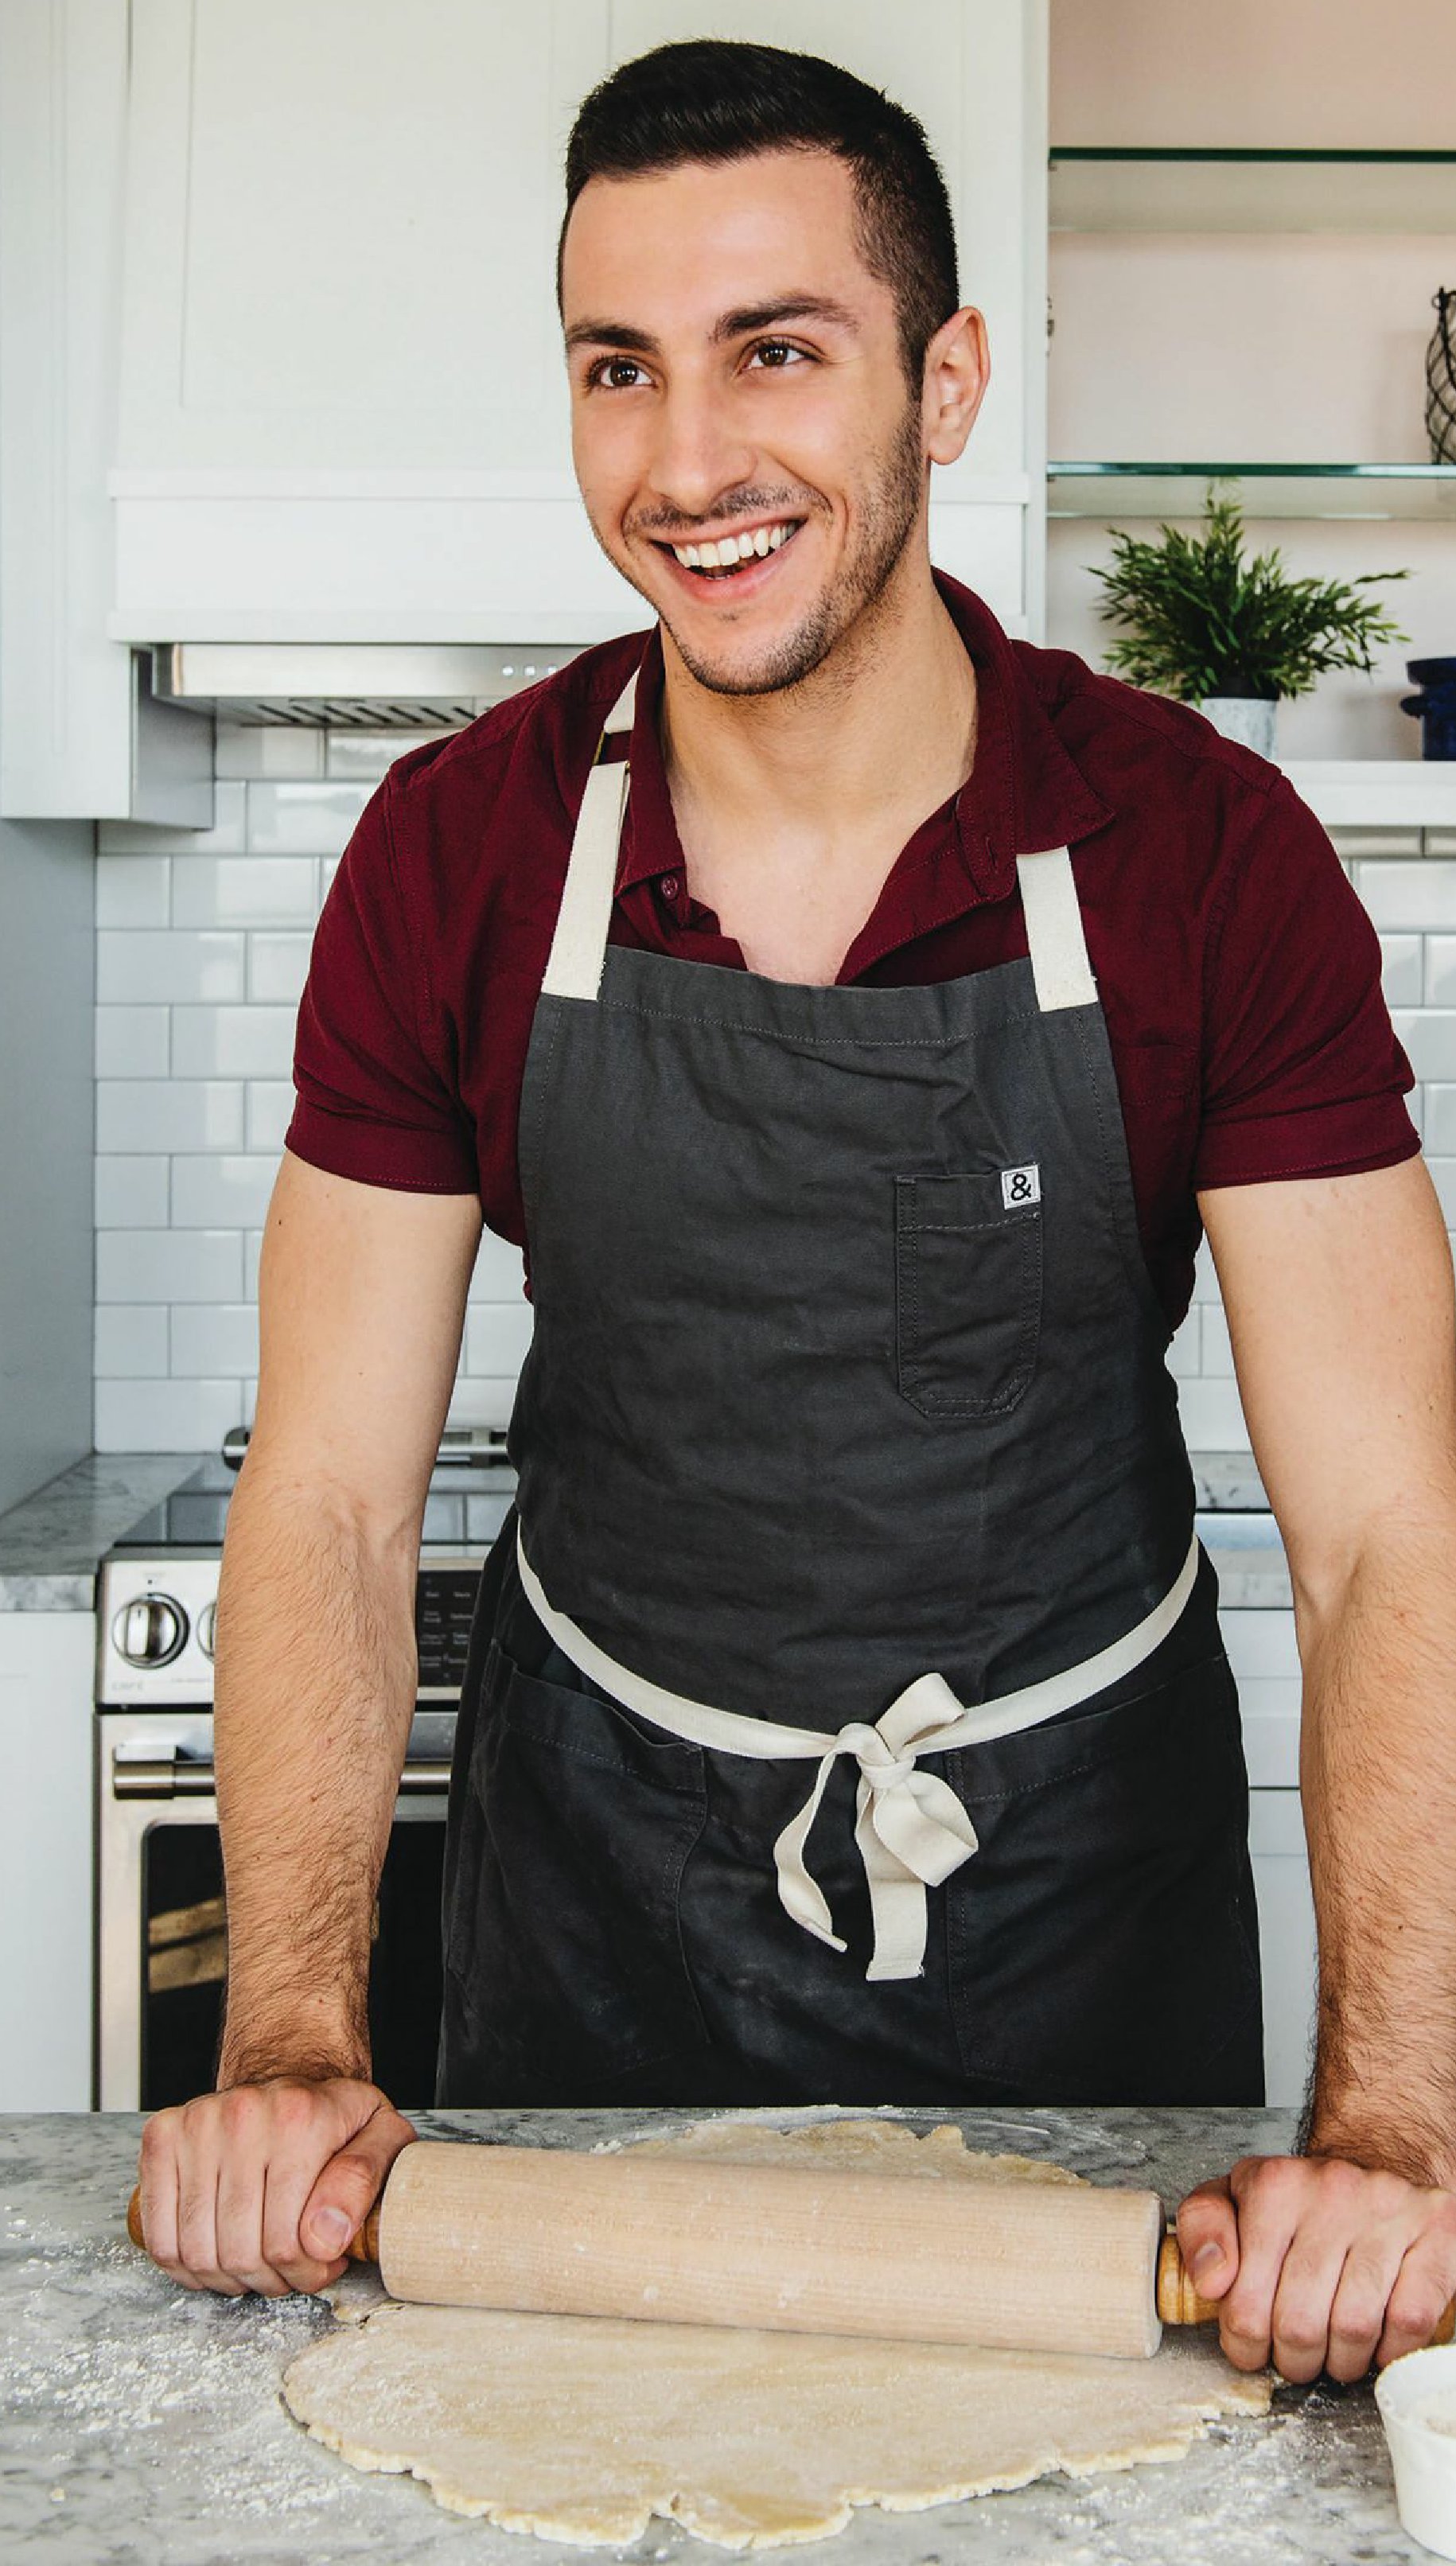 A new face on the national food scene, Jake Cohen got his start cooking at fabled New York restaurants like Daniel and ABC Kitchen. PHOTO BY MATT TAYLOR-GROSS